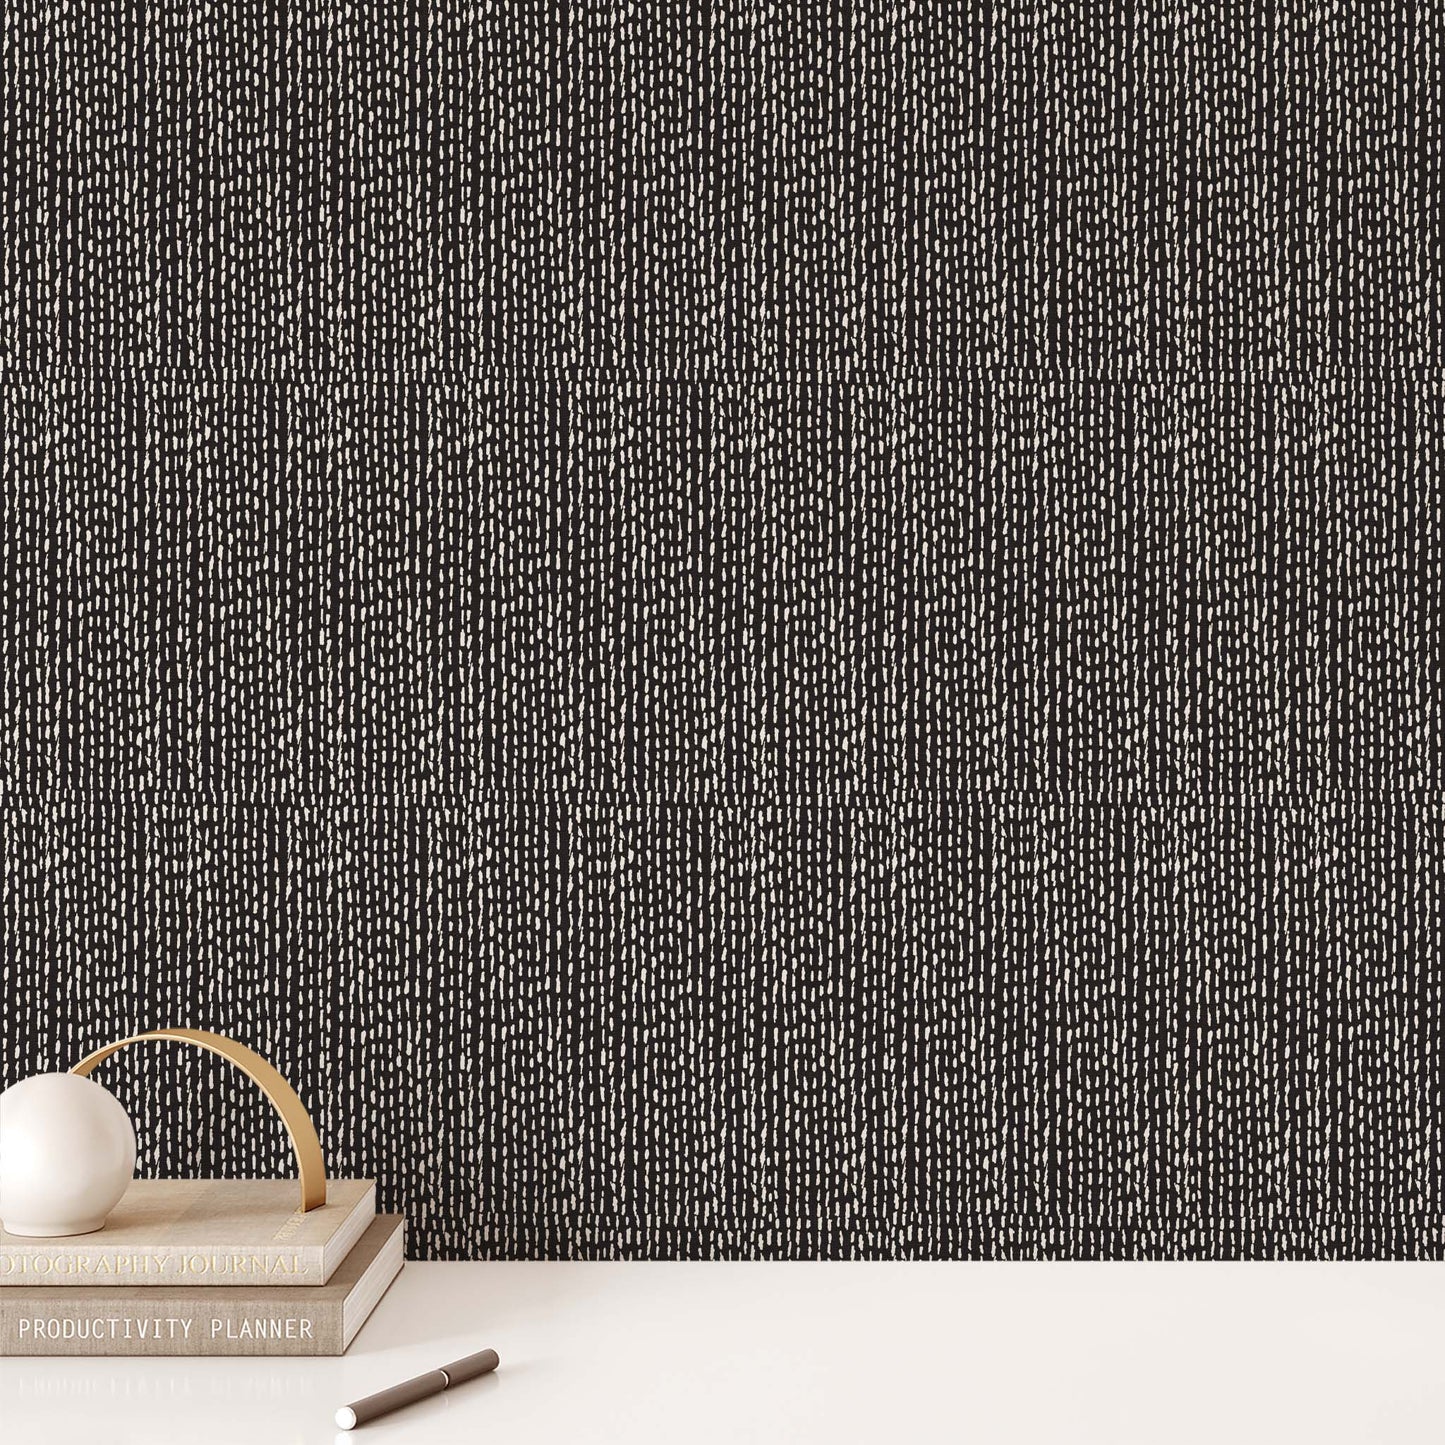 Brighten up your walls with this Freehand Dashes Wallpaper — the perfect mix of charcoal. With freehand dashes, this wallpaper can liven up any space, adding unique depth to the room.